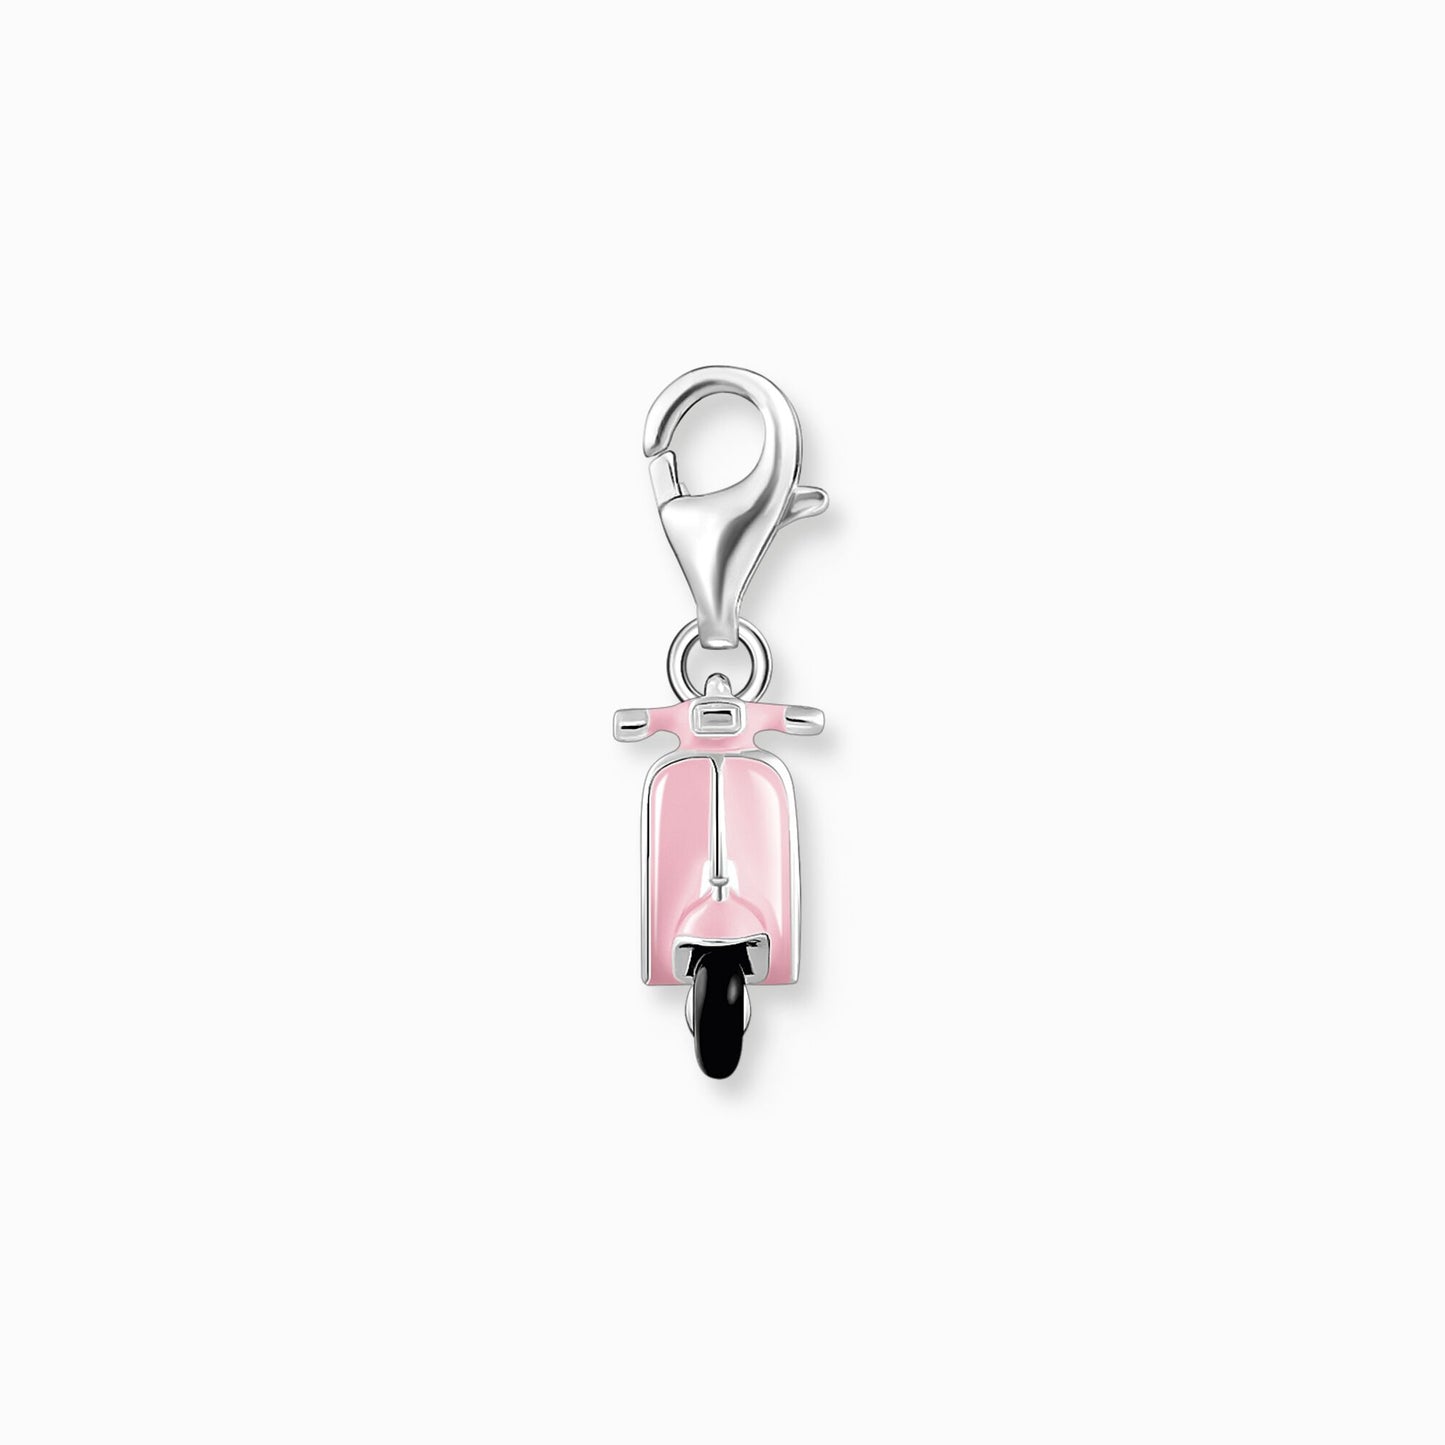 Thomas Sabo Charm Pendant Pink Scooter Silver 1992-007-9